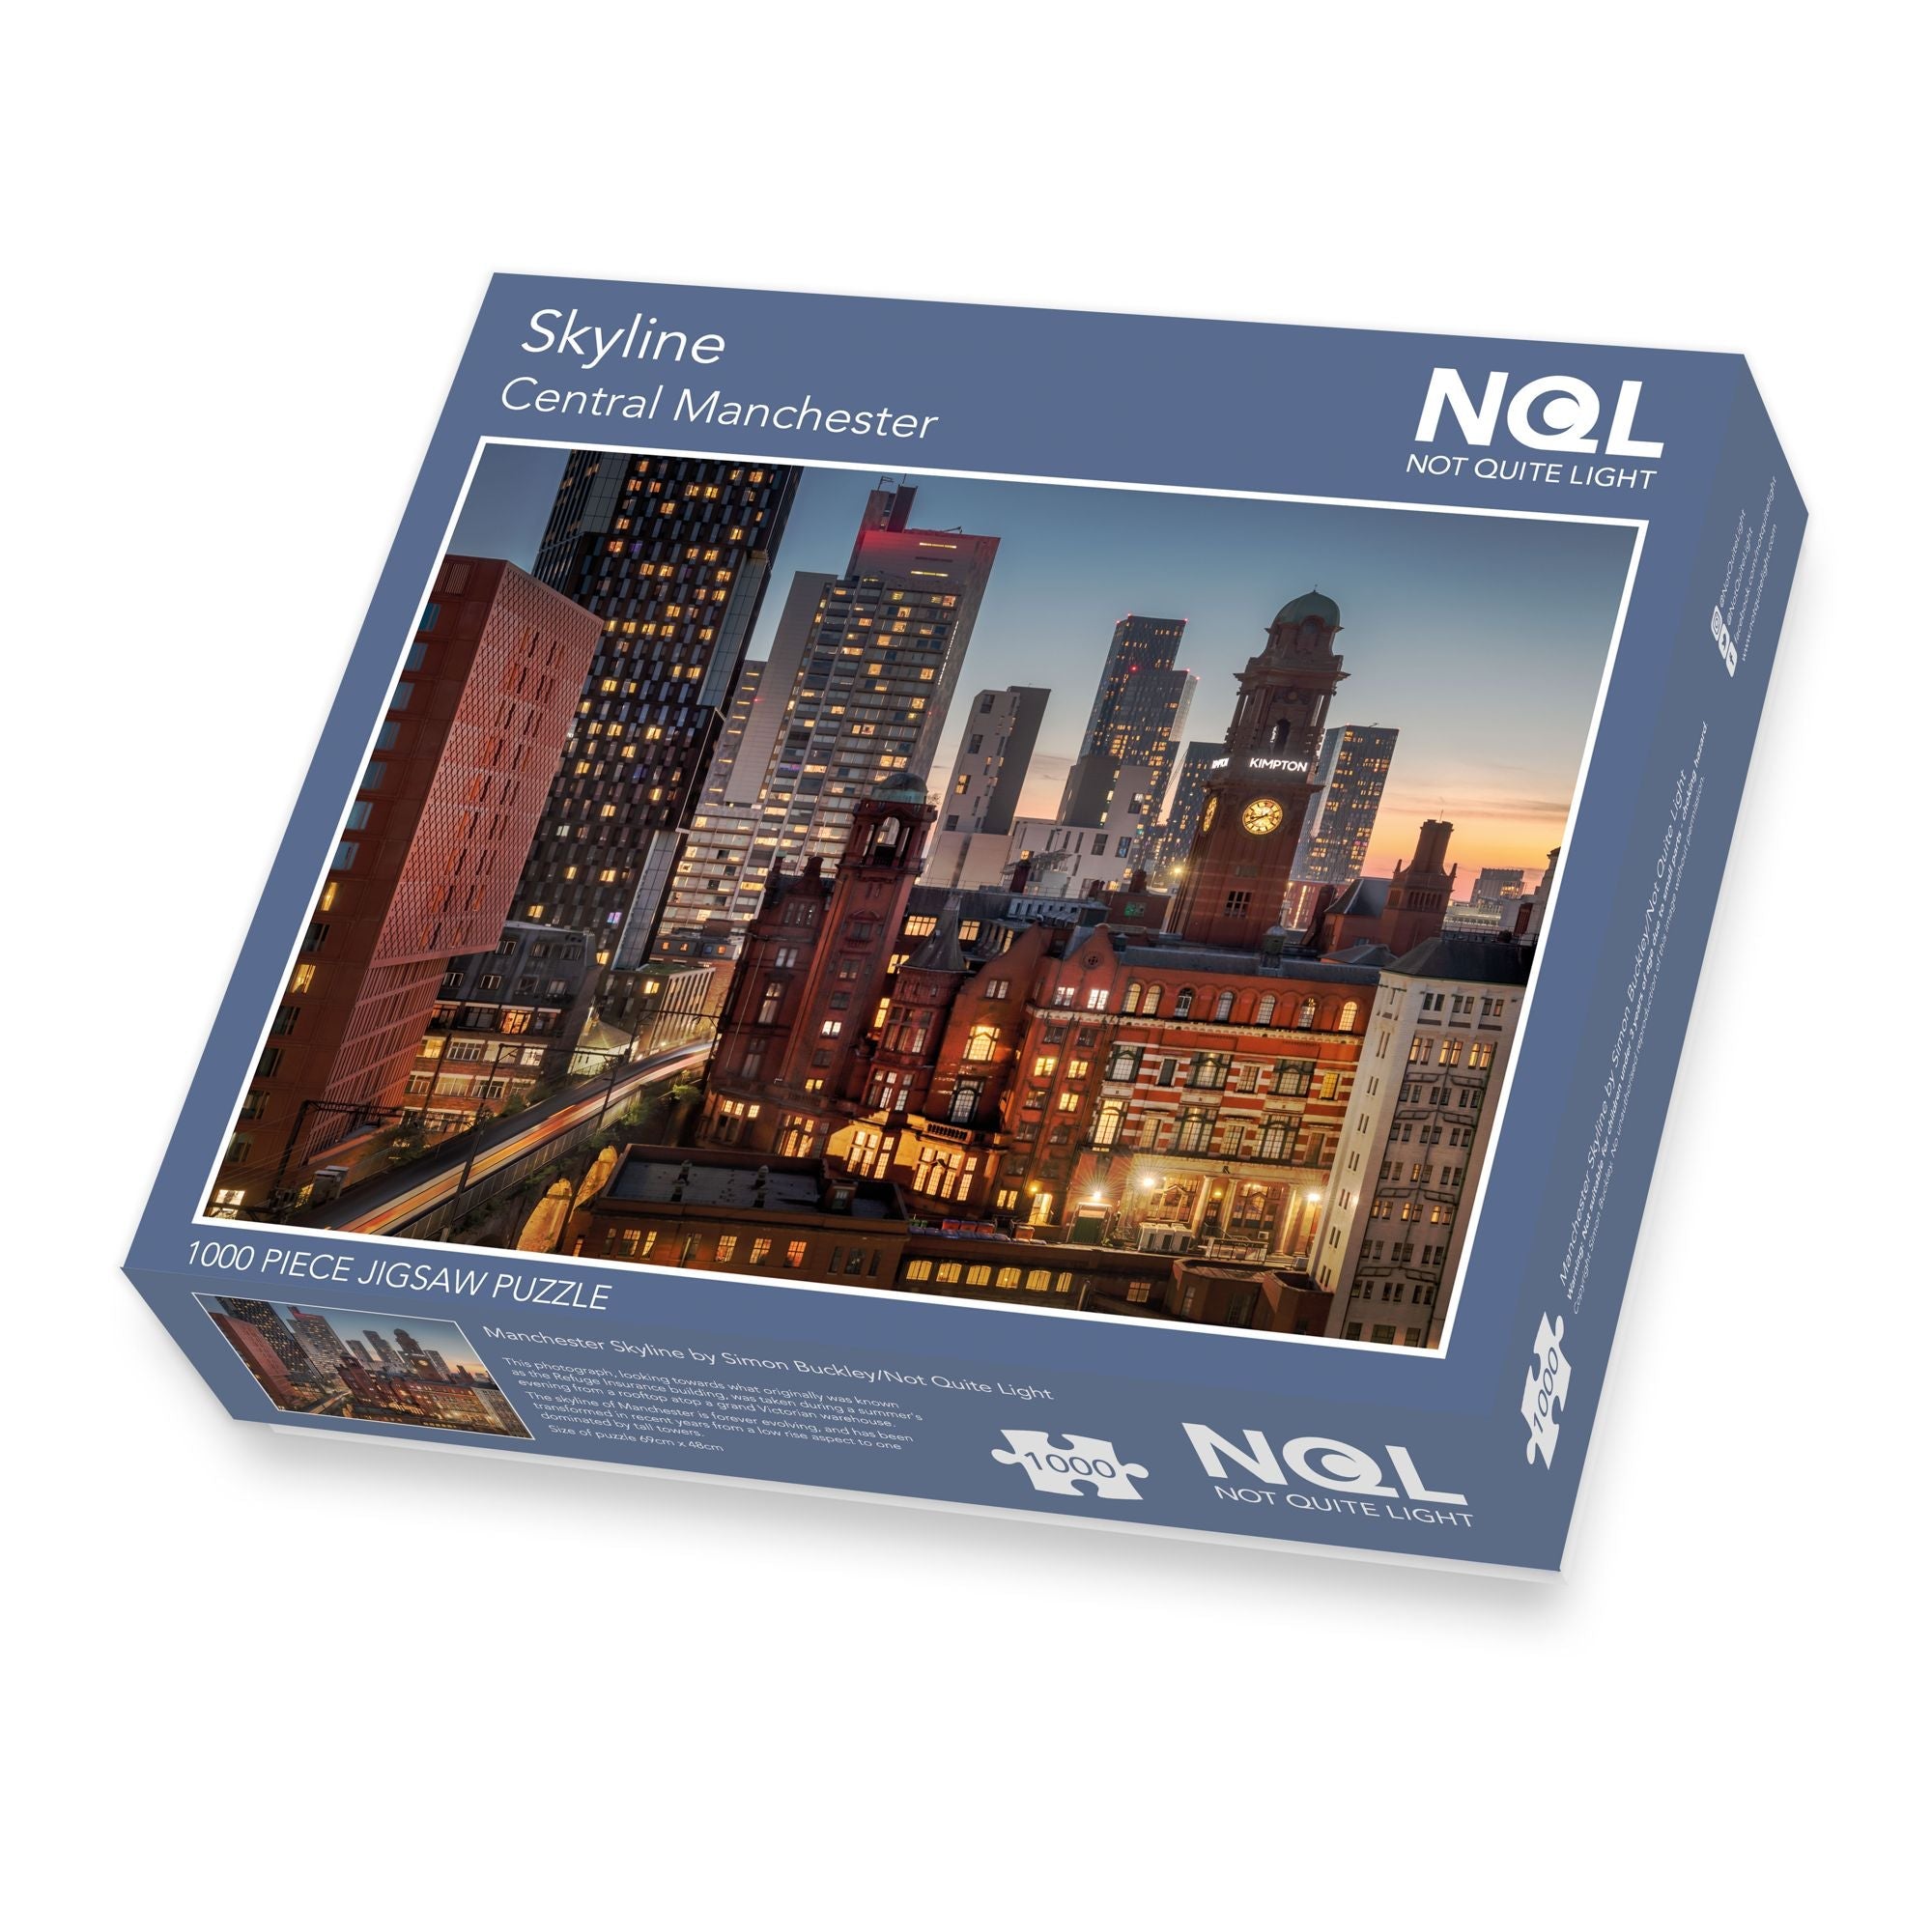 Jigsaw box featuring an image of a Manchester Skyline seen at a slight angle with the lower right corner slanted towards the viewer.